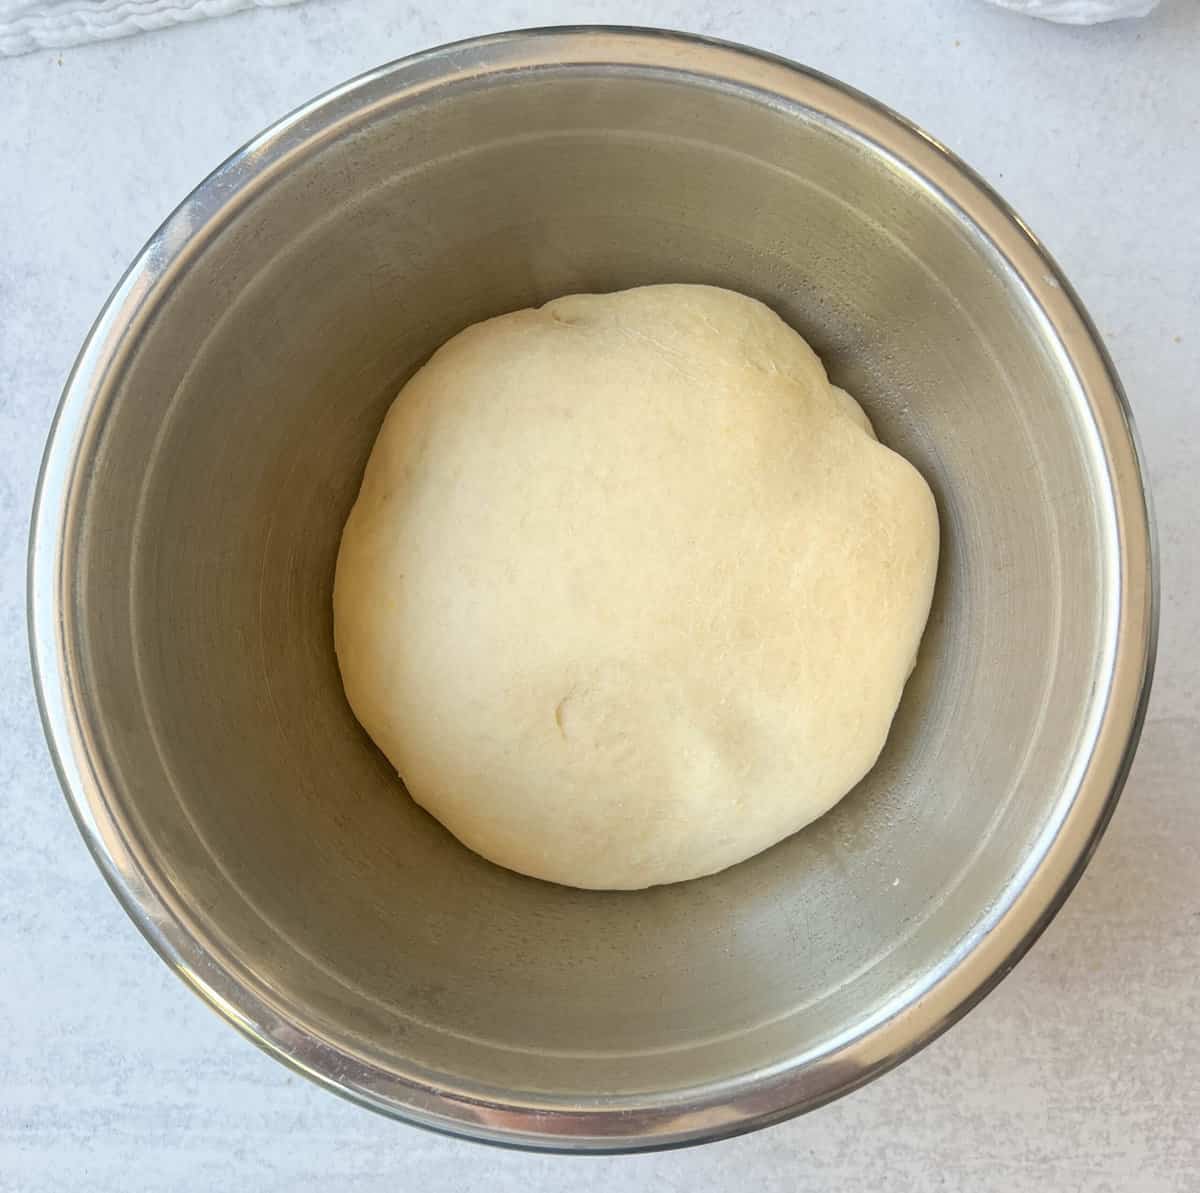 Parker House Dough Ball Rising. How to make homemade Parker House Rolls from scratch.